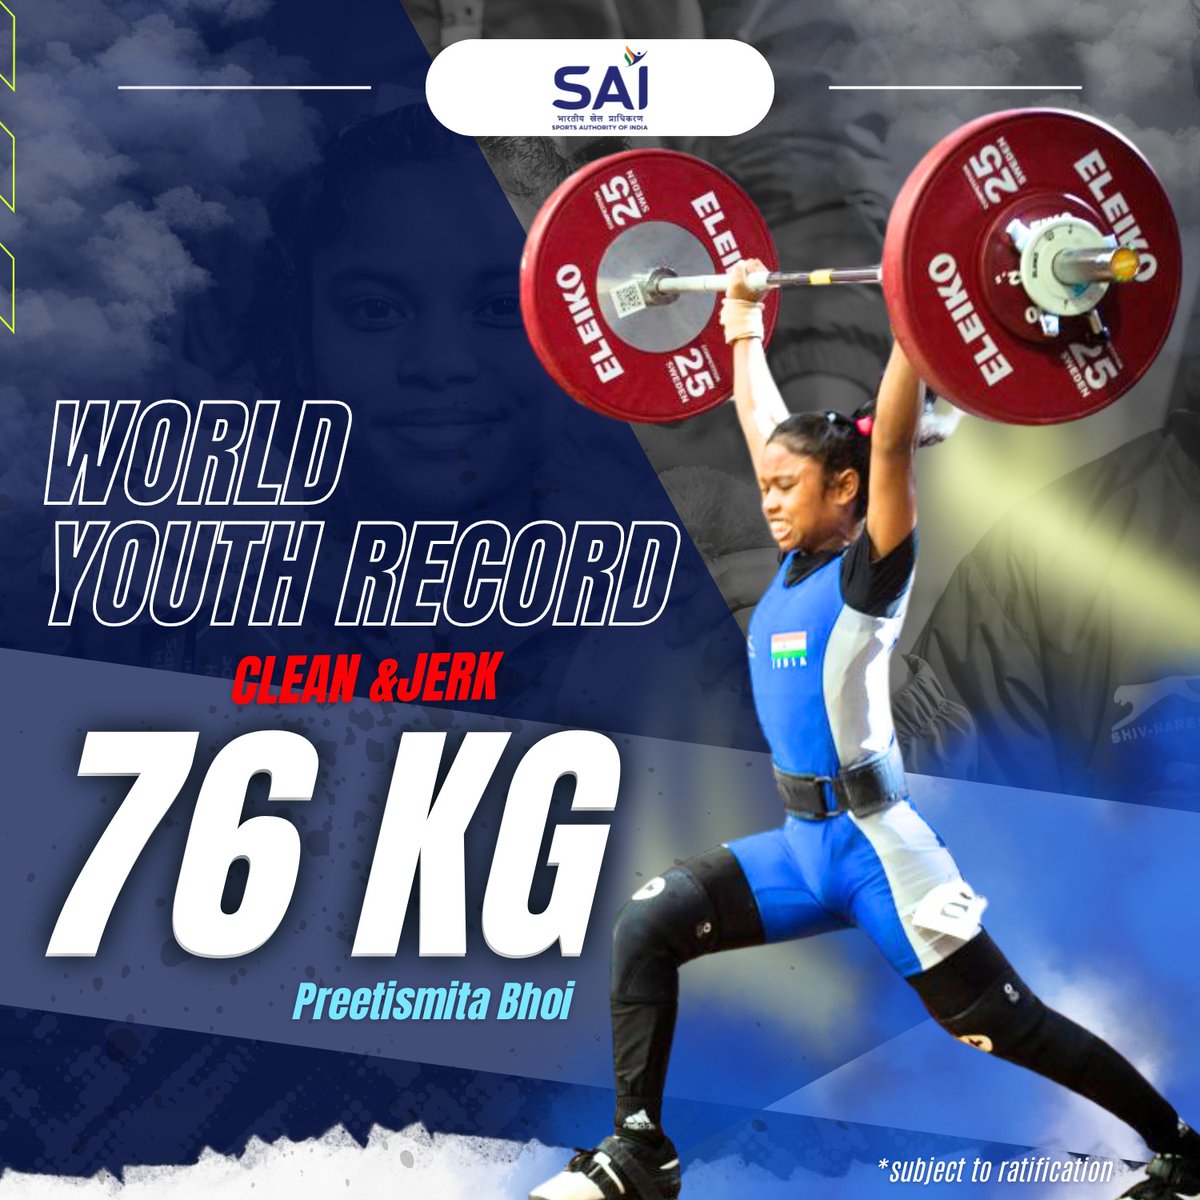 World Youth Record Alert🚨👀 We are in absolute awe of Preetismita Bhoi for shattering the previous Weightlifting🏋️‍♀️ C & J world youth record and registering a new record of 76 kg in the women's 40 kg category💪😍